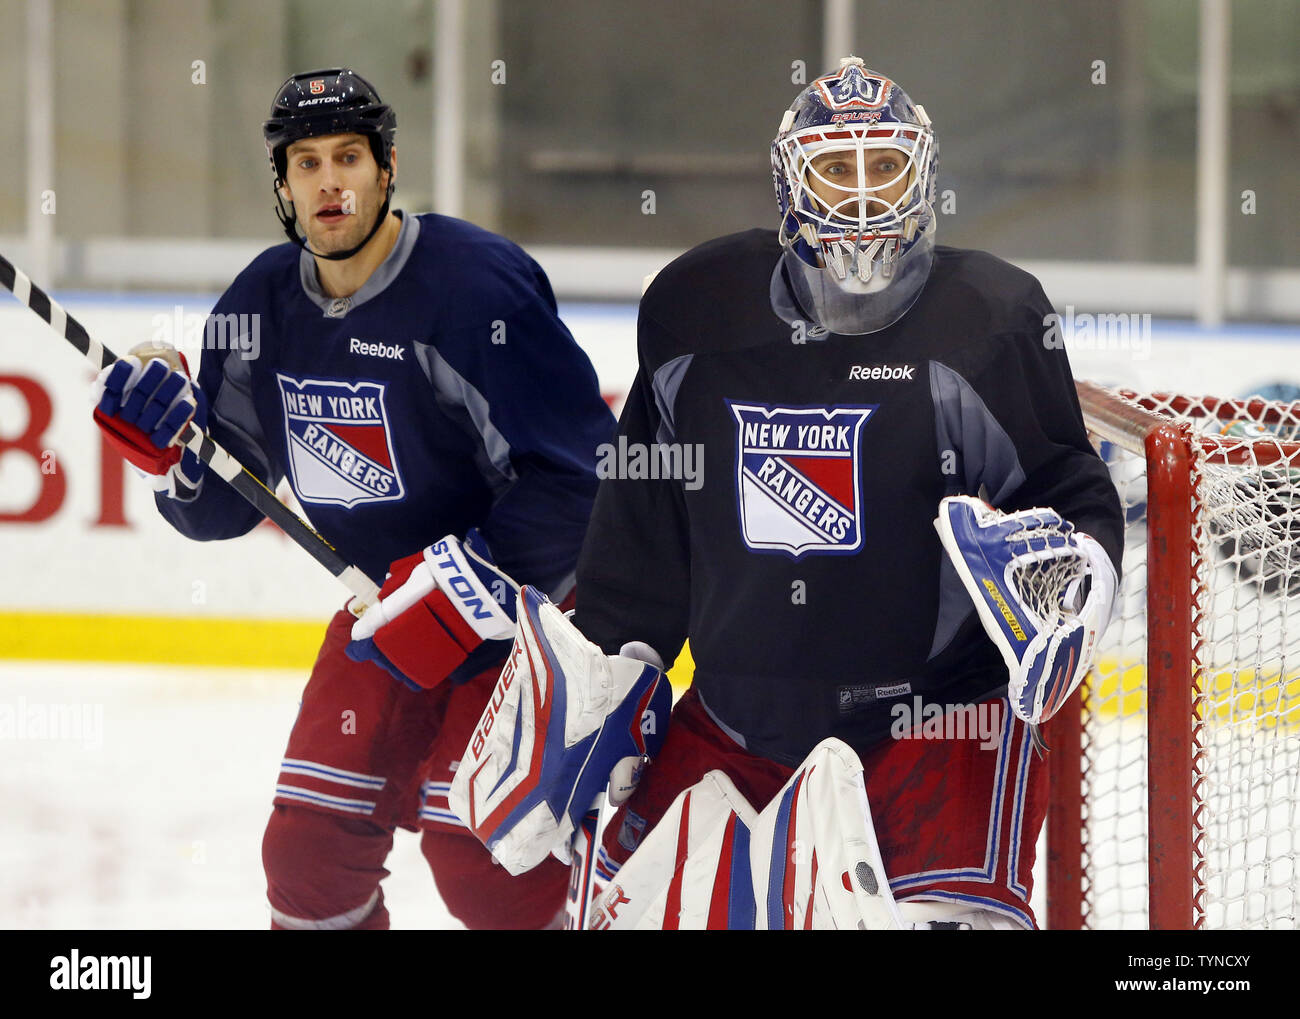 The New York Rangers team practices at the Rangers practice facility in  Greenburgh, NY on January 14, 2013. The NHL and its players reached an  agreement that ended the lockout allowing the